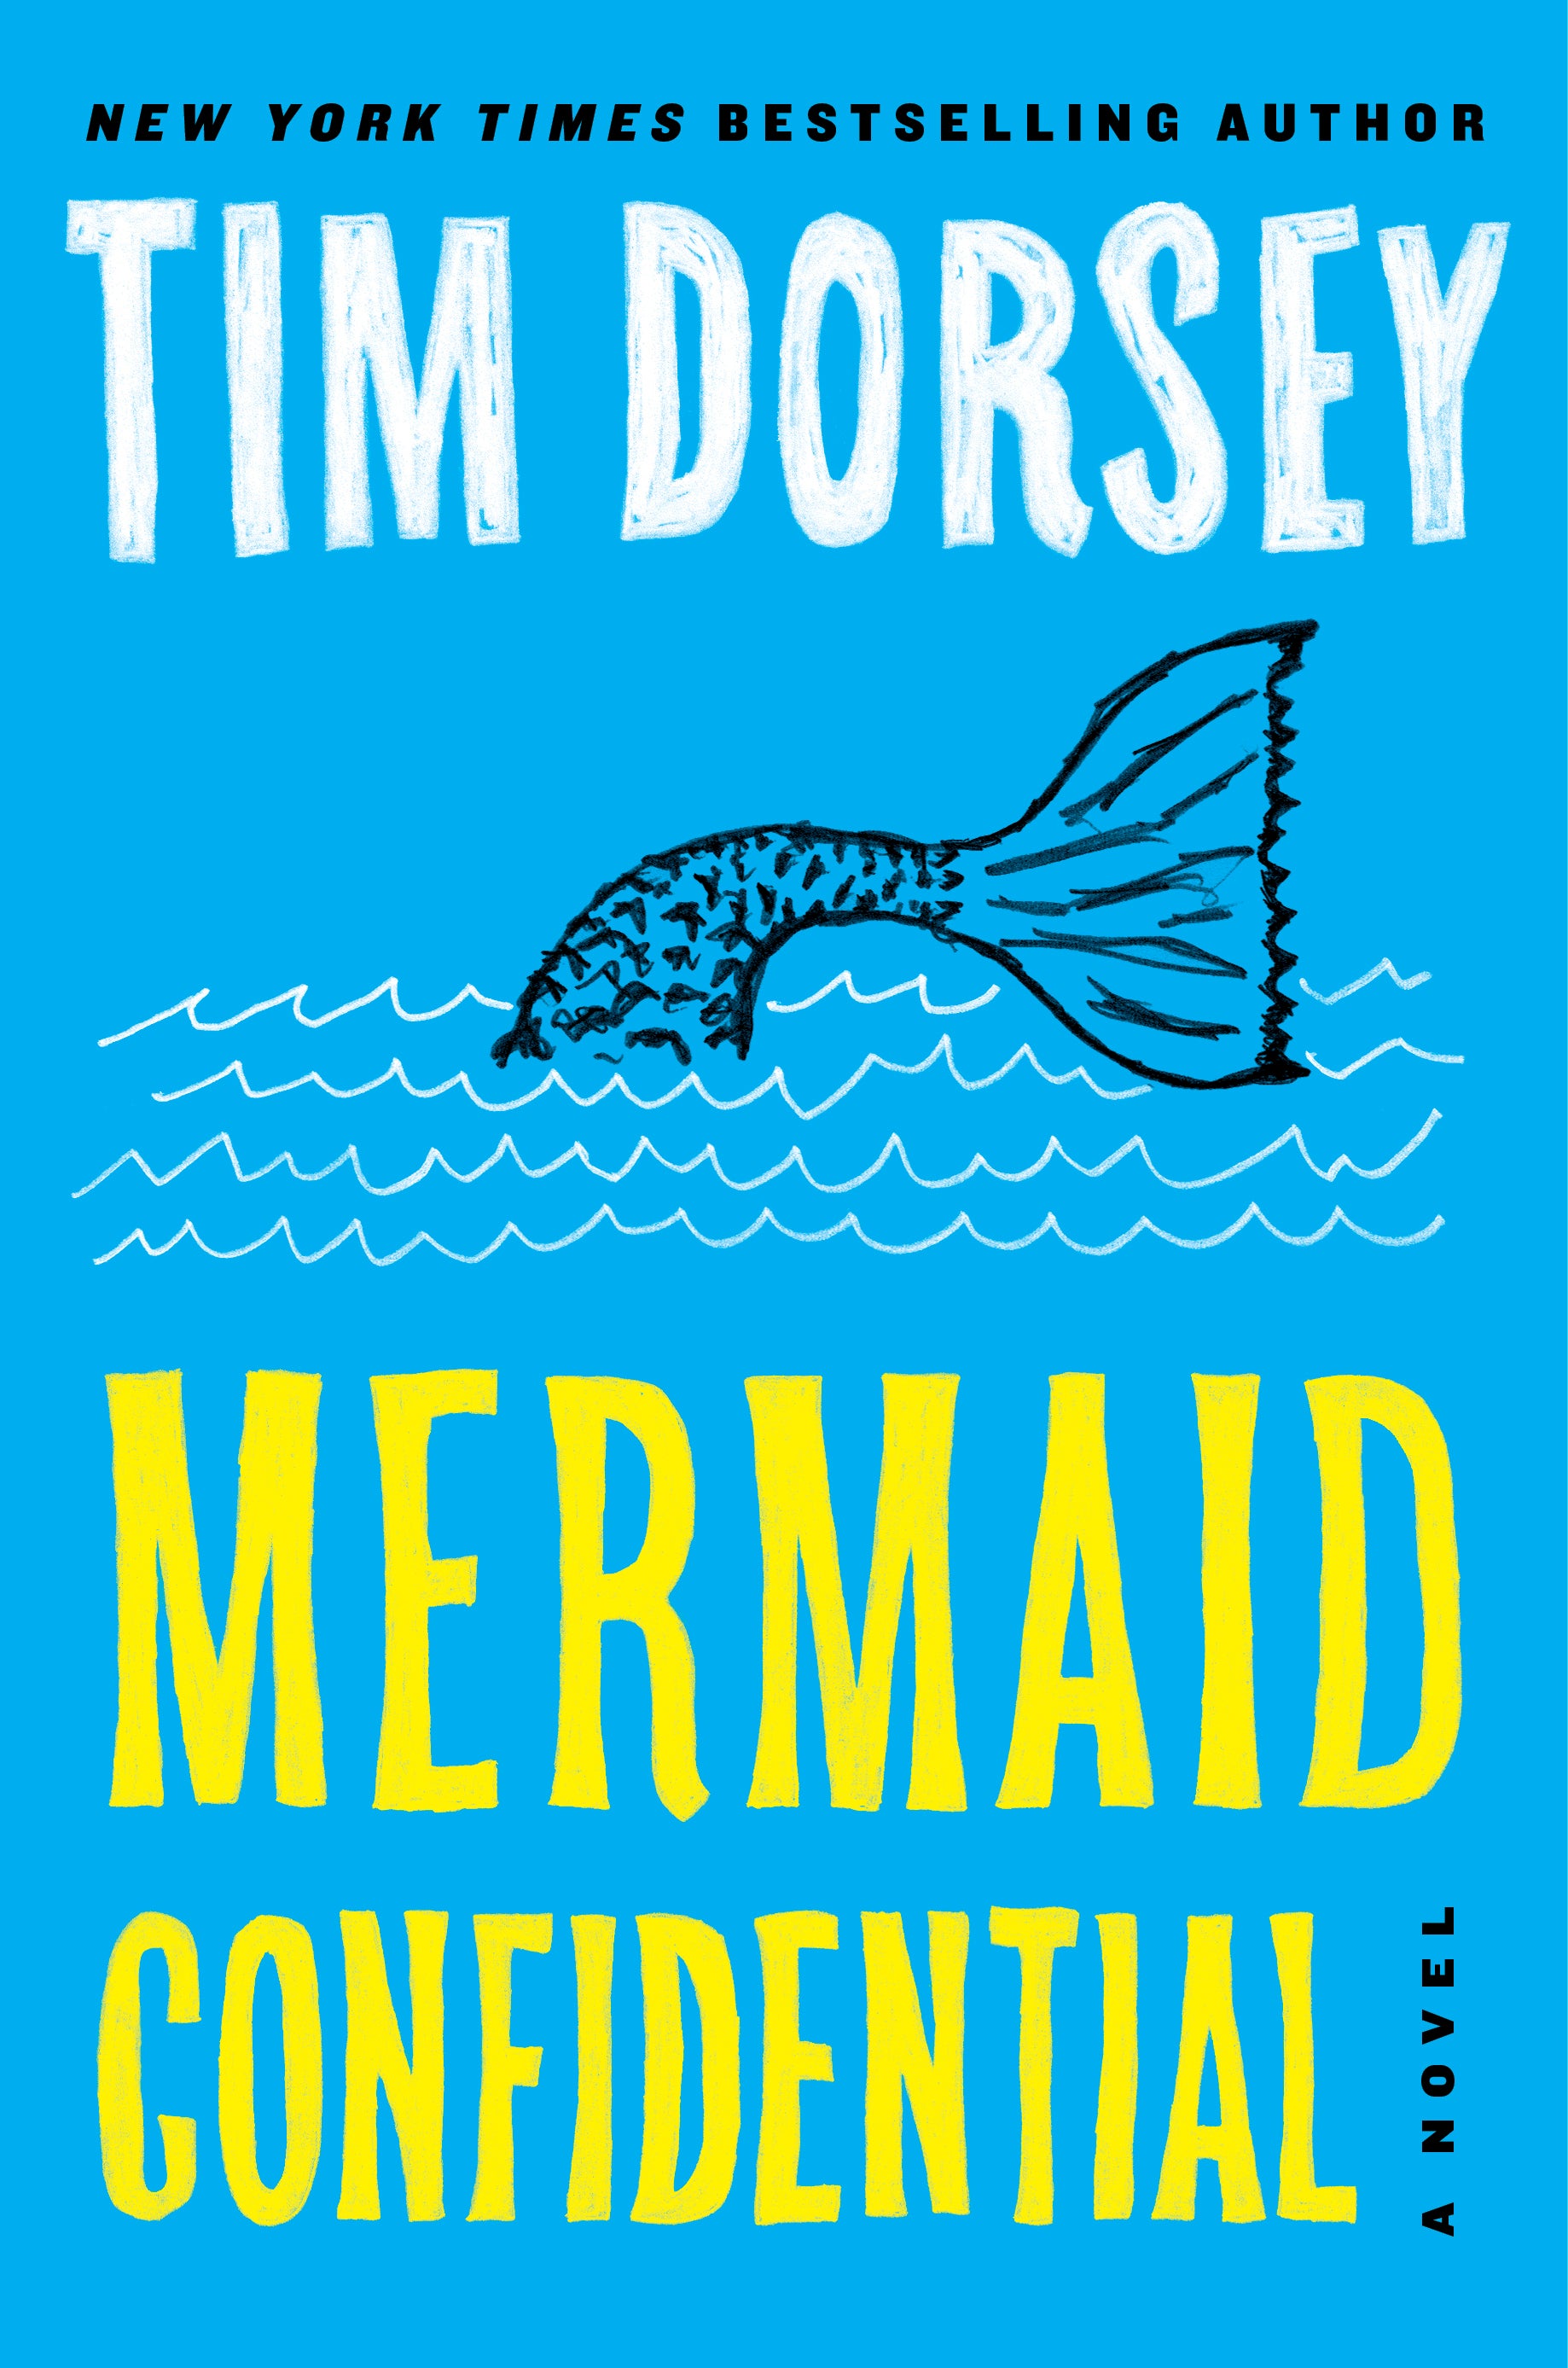 Book Review - Mermaid Confidential